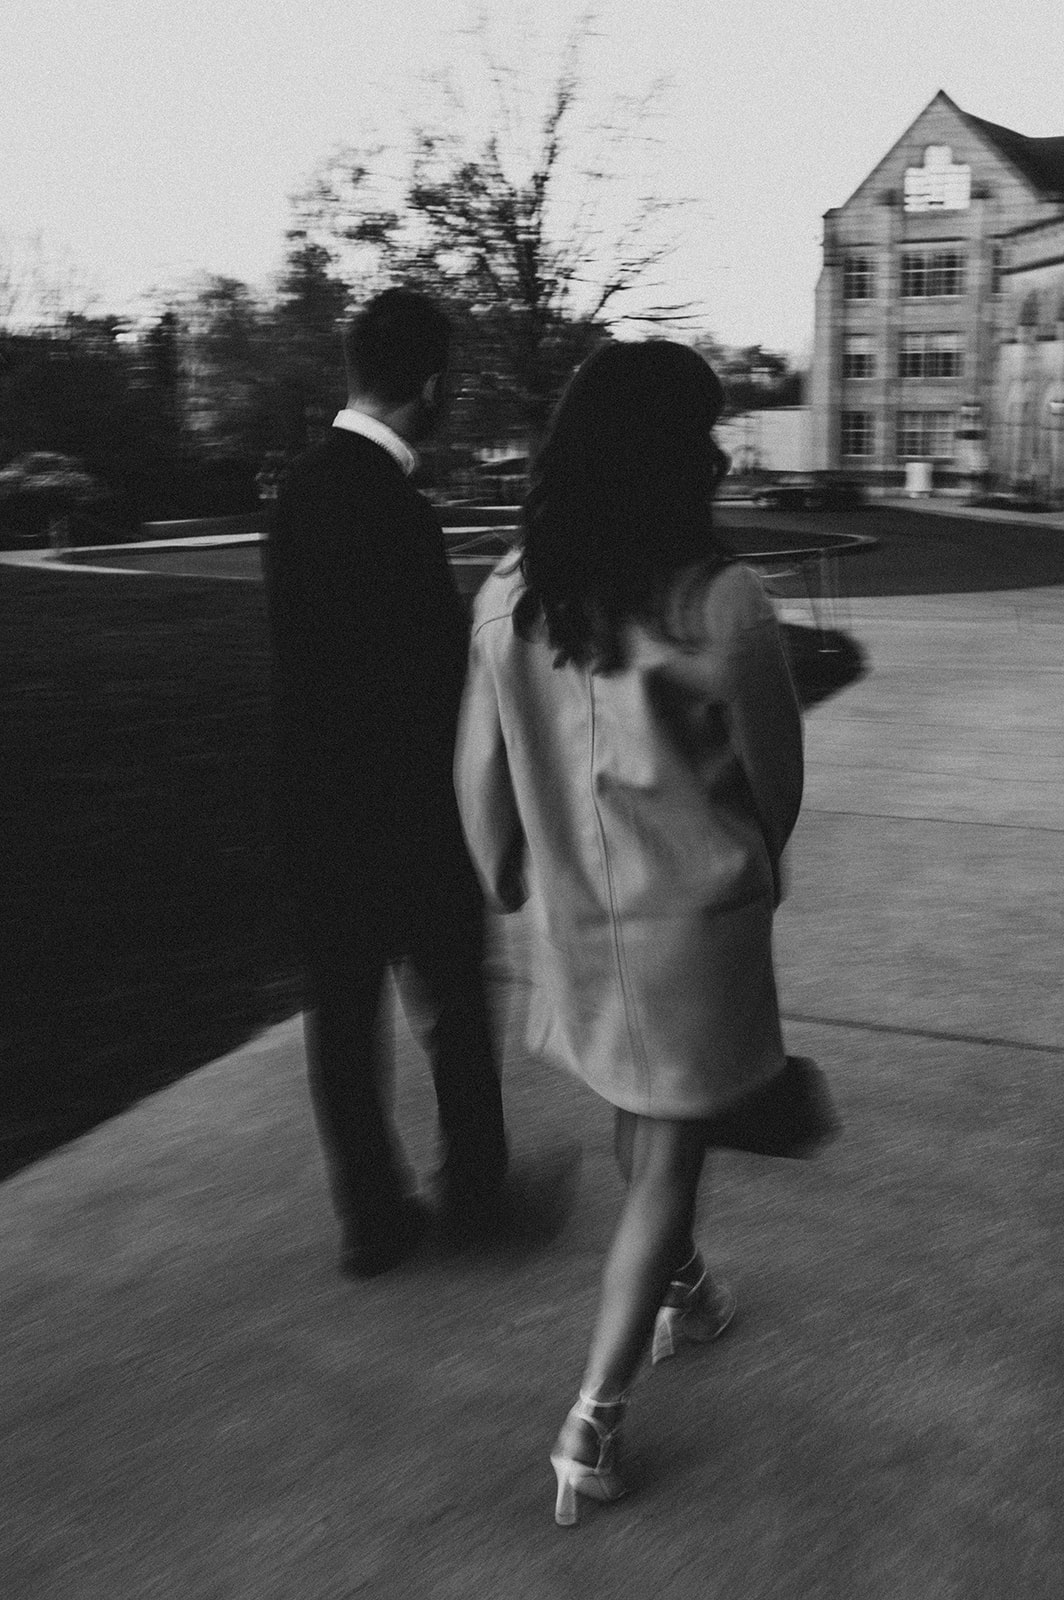 Documentary-style photo of couple walking hand-in-hand in Bishop's Garden.